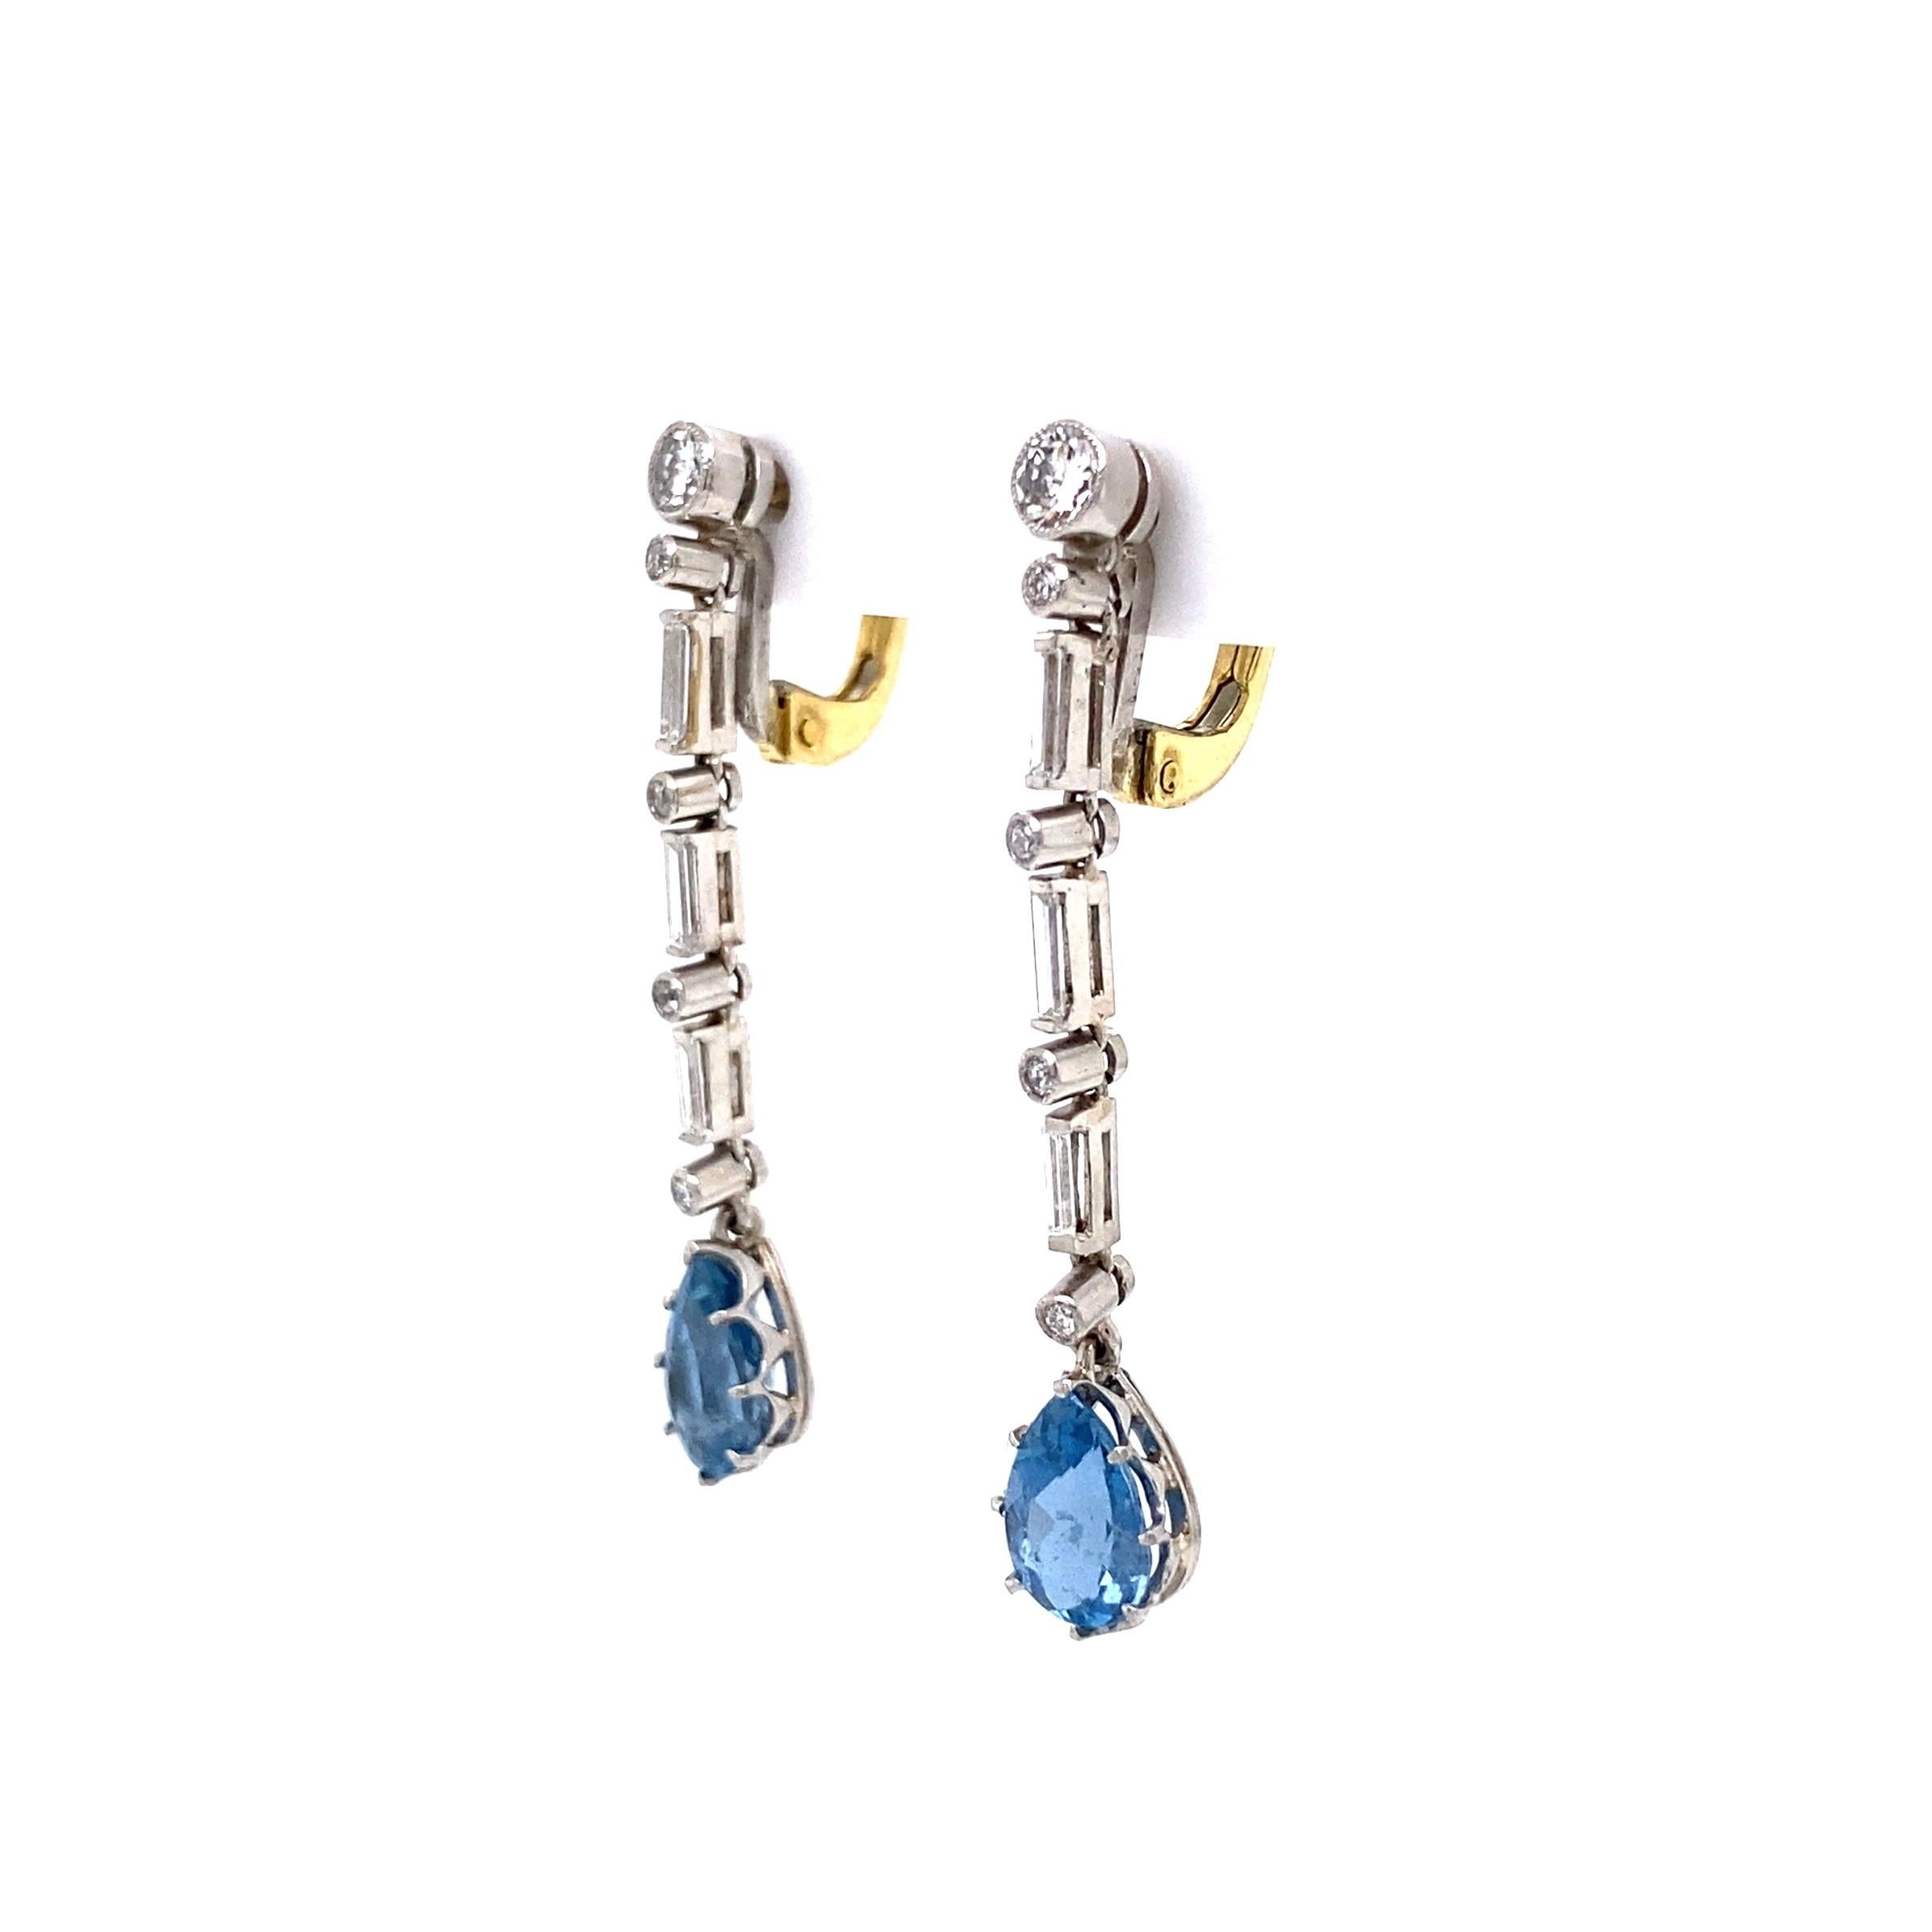 Stunning Aquamarine and Diamond Platinum Drop Dangle Earrings. Beautifully Hand crafted in Platinum. Each Drop Earring Hand set with alternating round and baguette Diamonds, suspending a pear shape deep blue Aquamarine. Approx. 0.76tcw of Diamonds